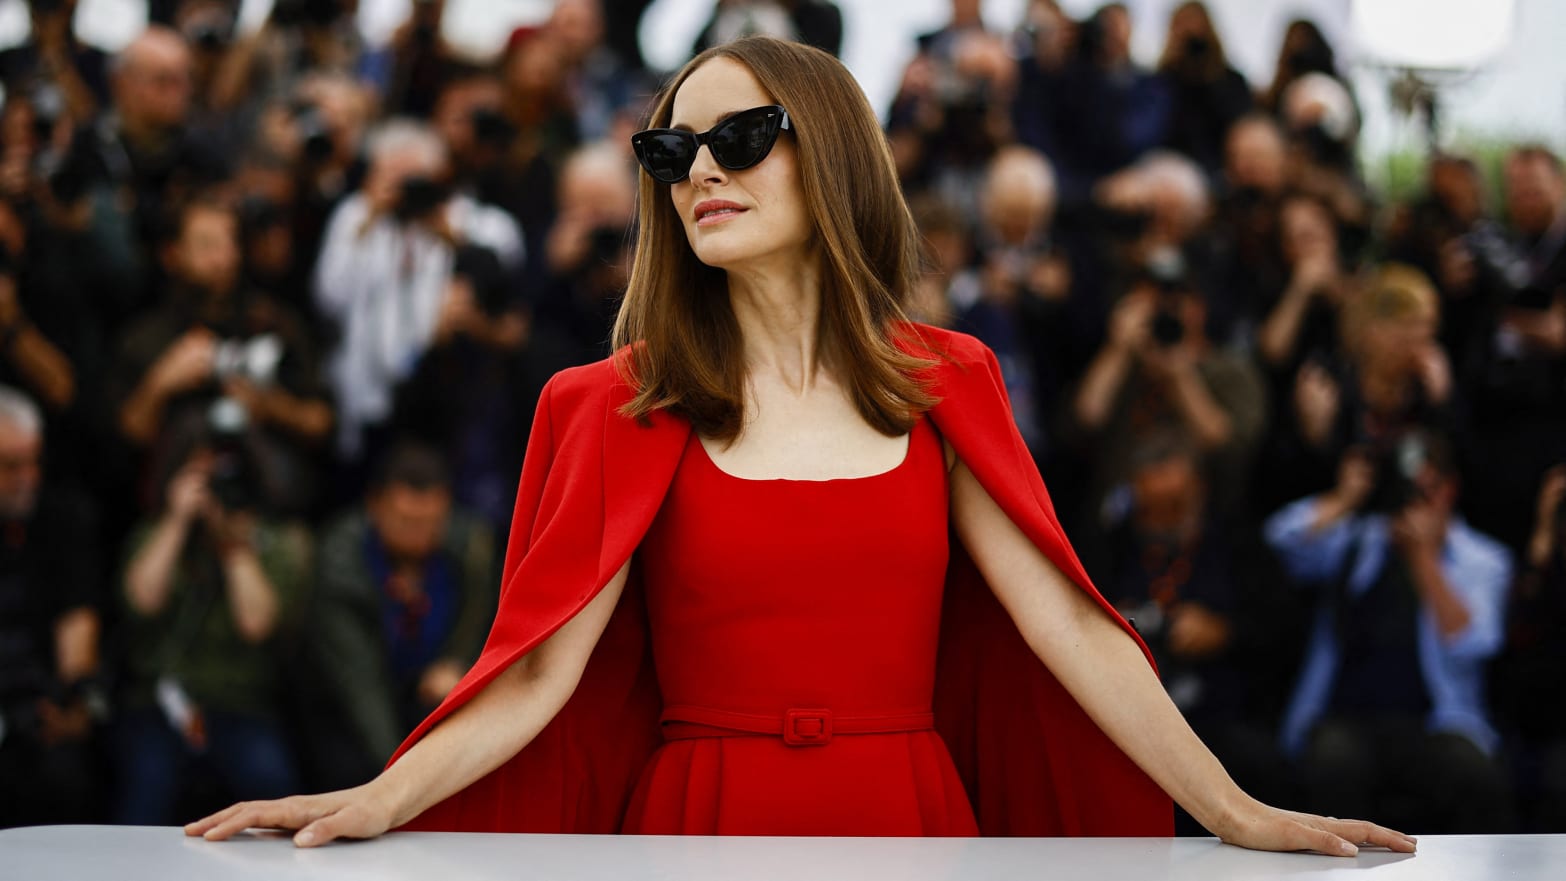 Why the Catwalk Is Coming to Cannes - The New York Times